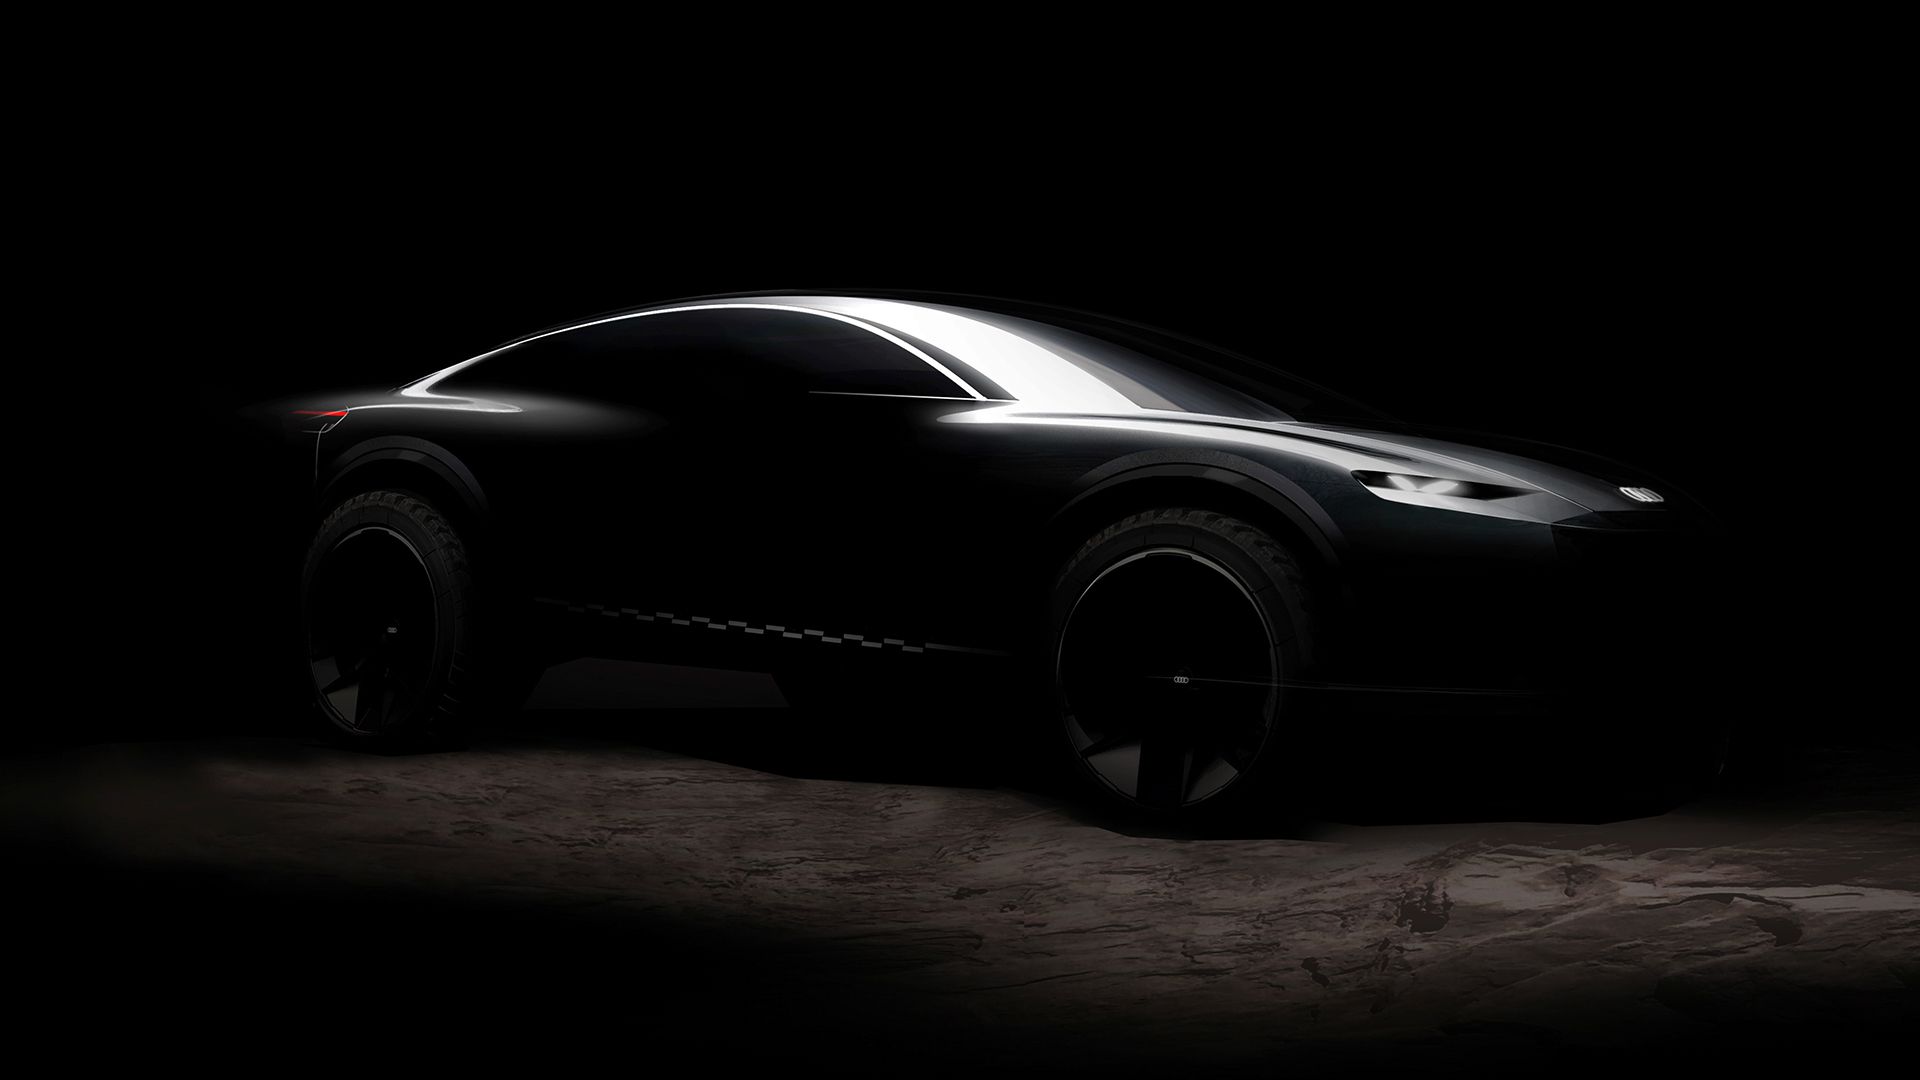 The Audi activesphere concept can be seen in its shadowy form.